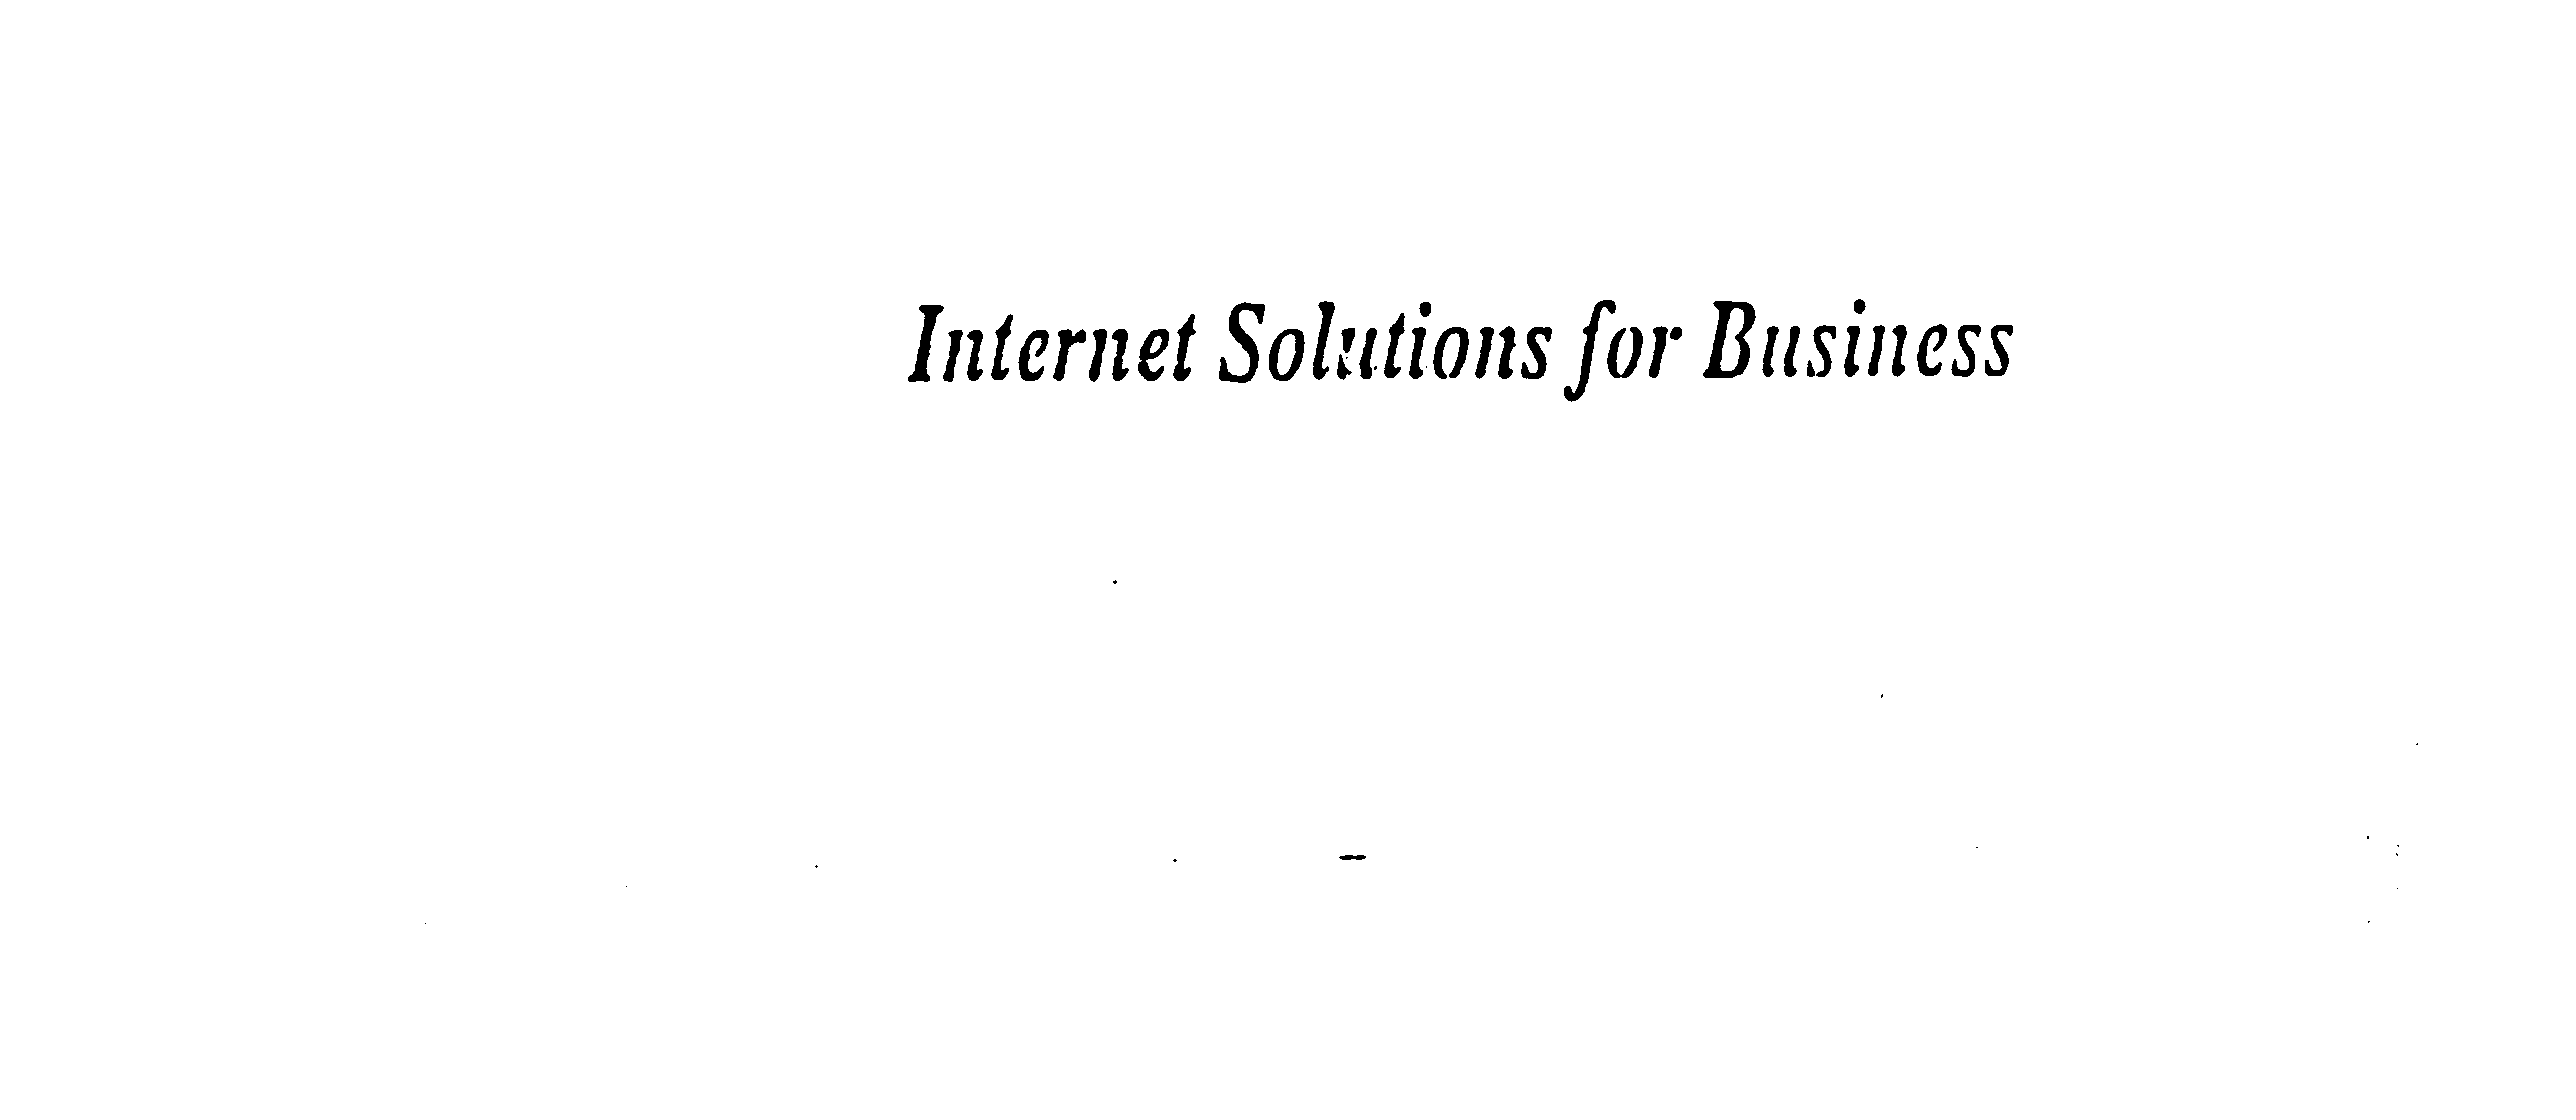  INTERNET SOLUTIONS FOR BUSINESS